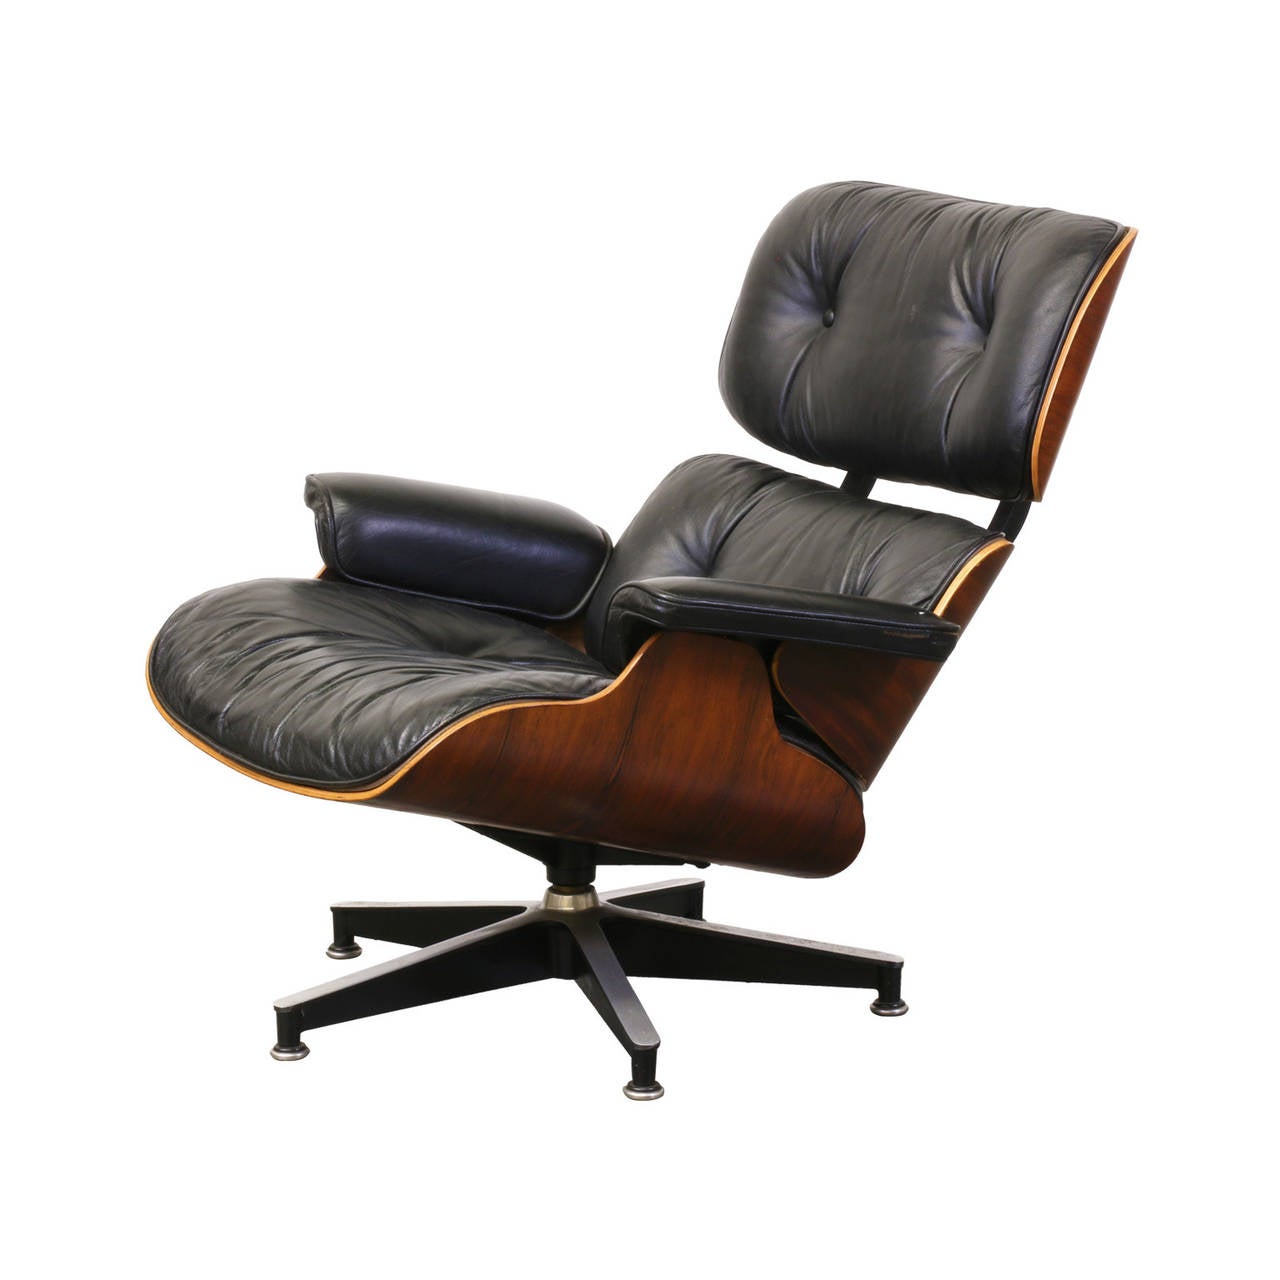 Mid-Century Modern Charles and Ray Eames 670 Leather and Rosewood Lounge Chair for Herman Miller